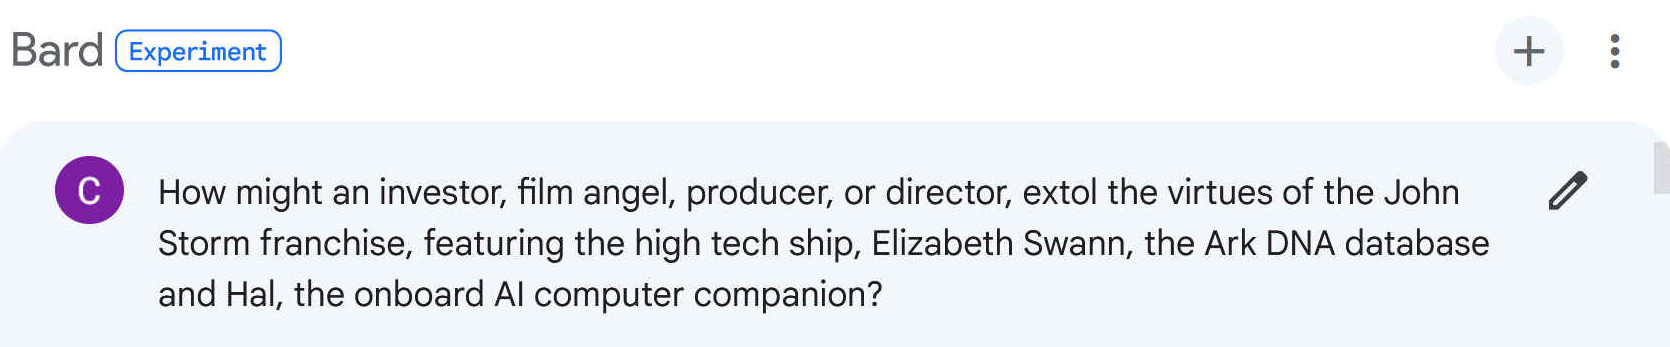 How might an investor, film angel, producer, or director, extol the virtues of the John Storm franchise, featuring the high tech ship, Elizabeth Swann, the Ark DNA database and Hal, the onboard AI computer companion?